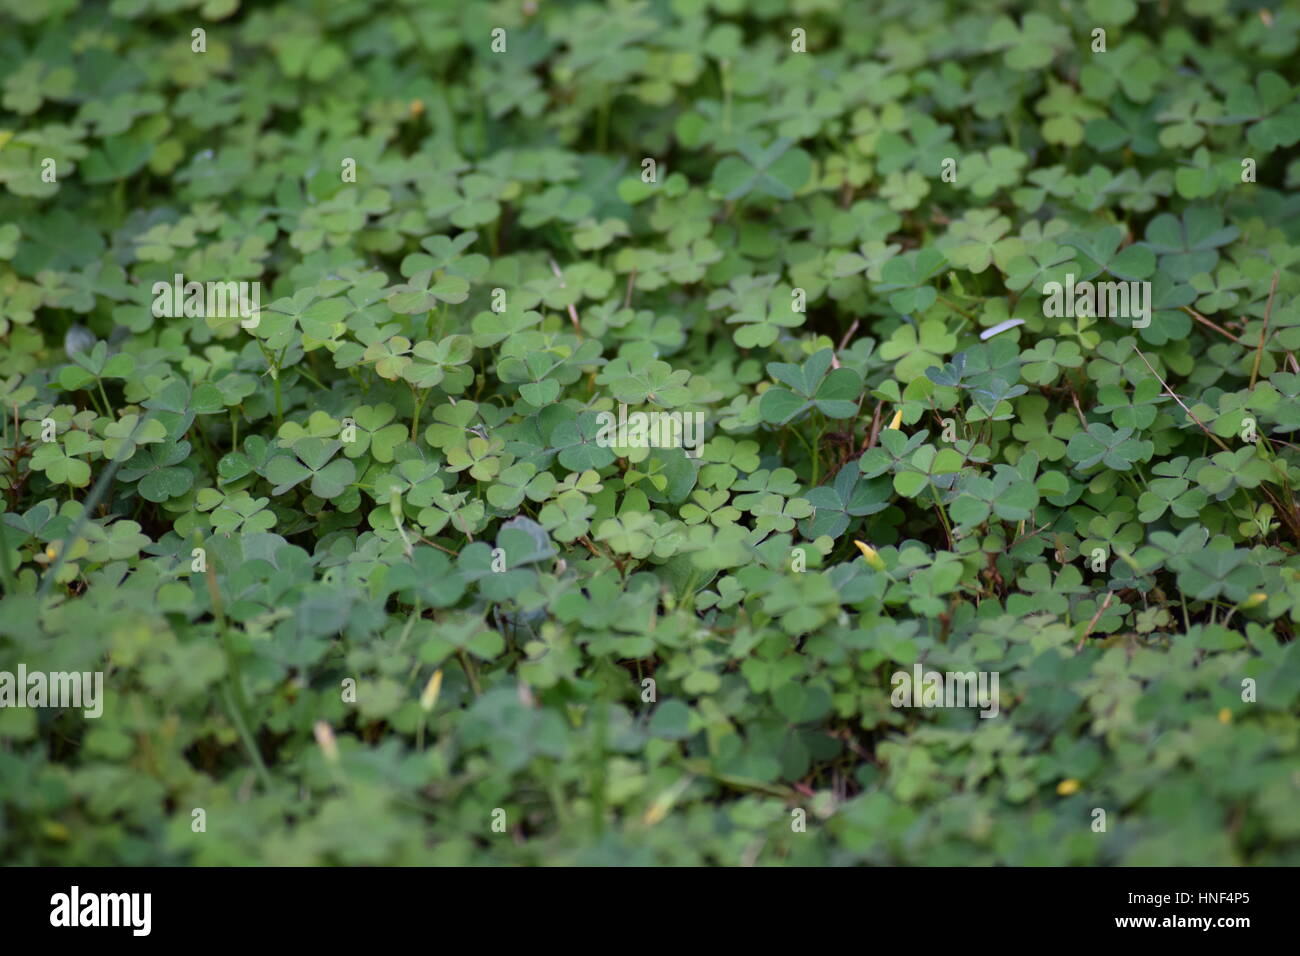 Clover patch Stock Photo